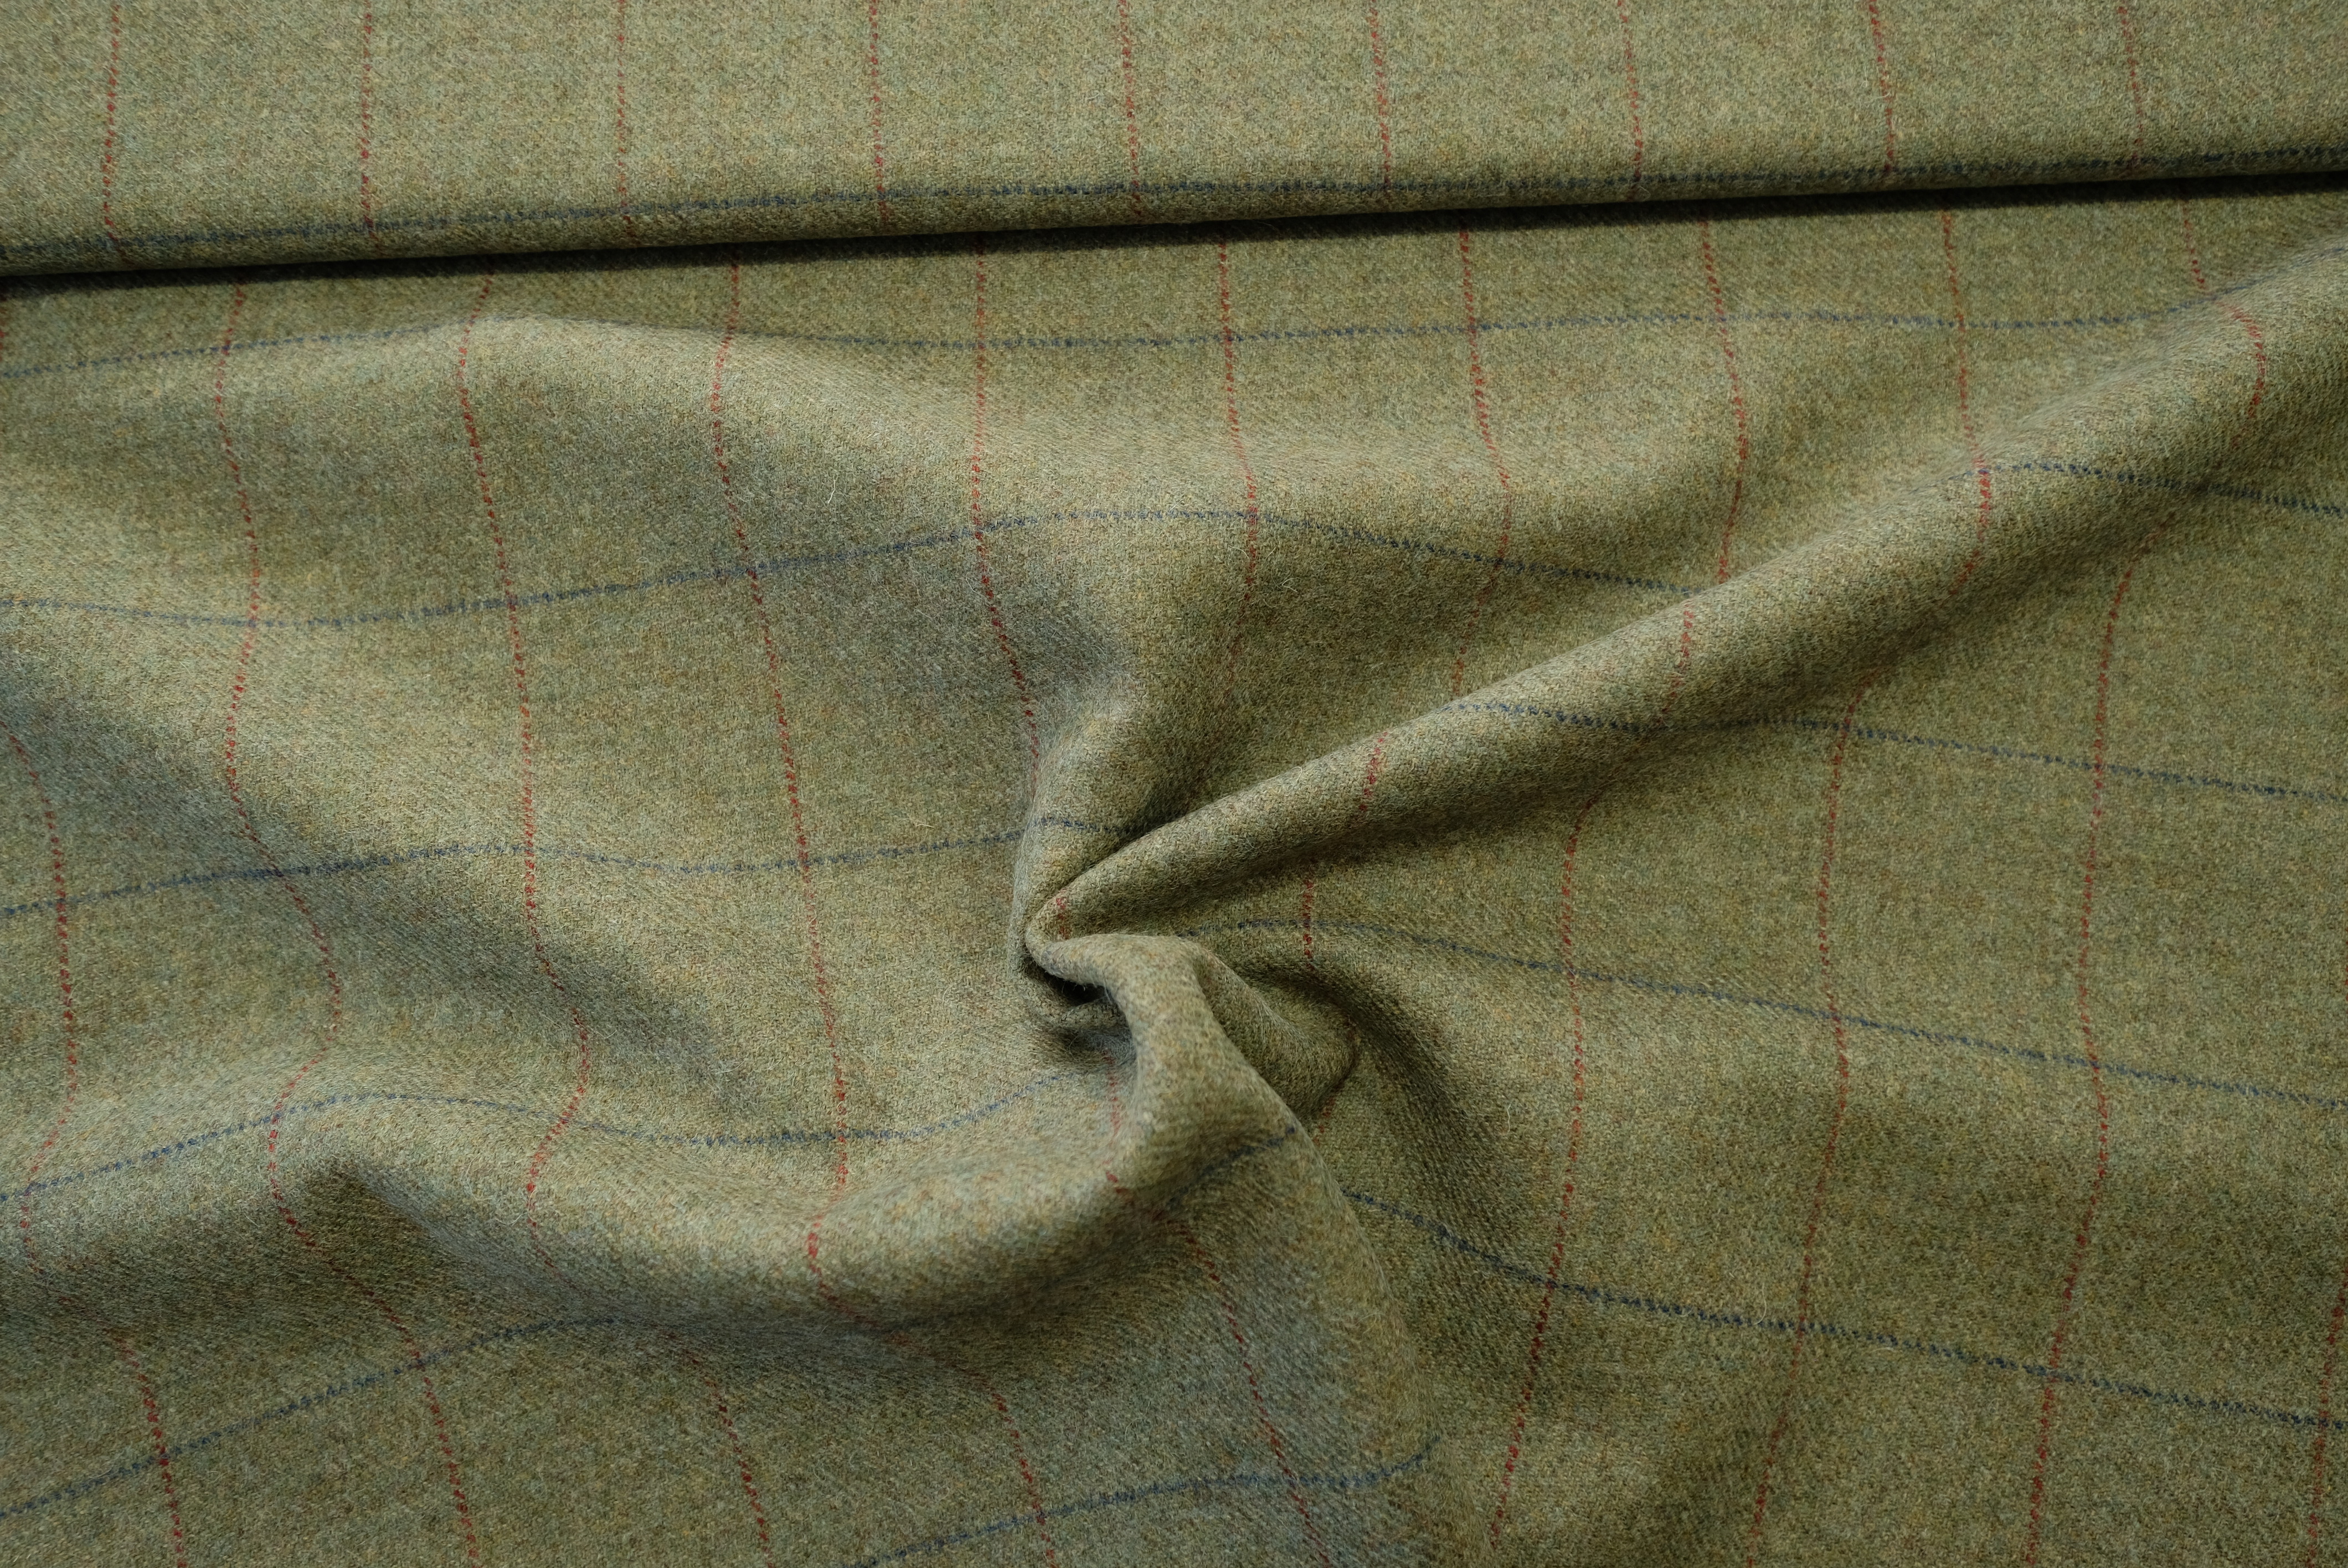 TWEED tartan wool fabric-gray green with red and blue 01